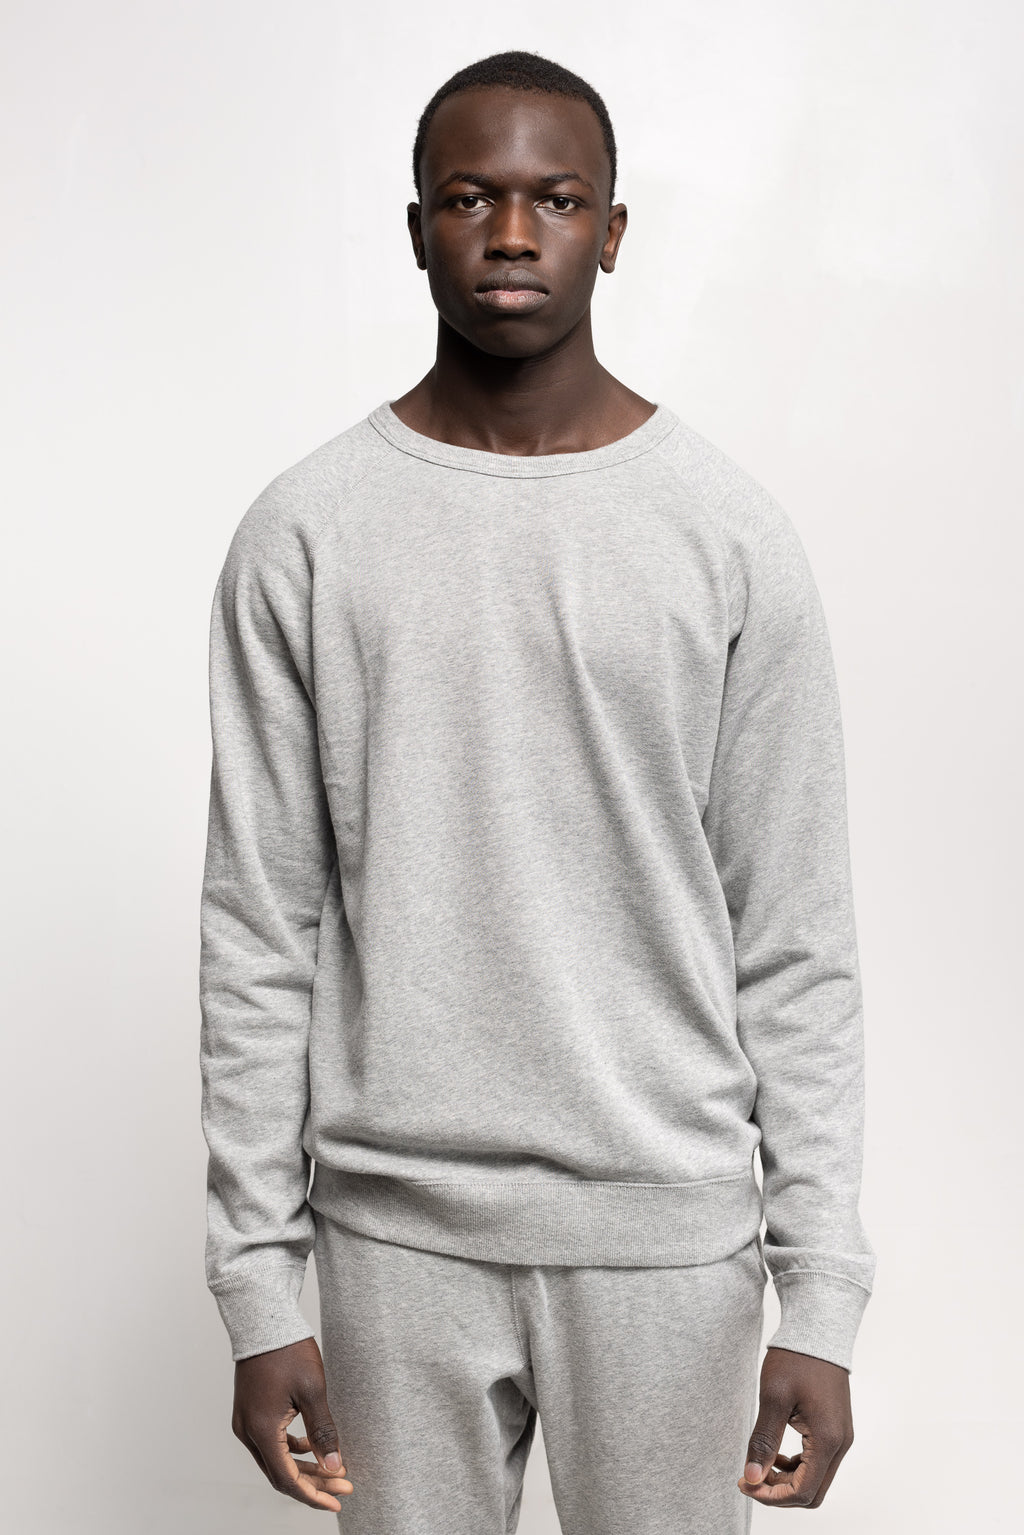 NS2117A-3 250g French Terry Long Sleeve Crew in Melange Grey 01